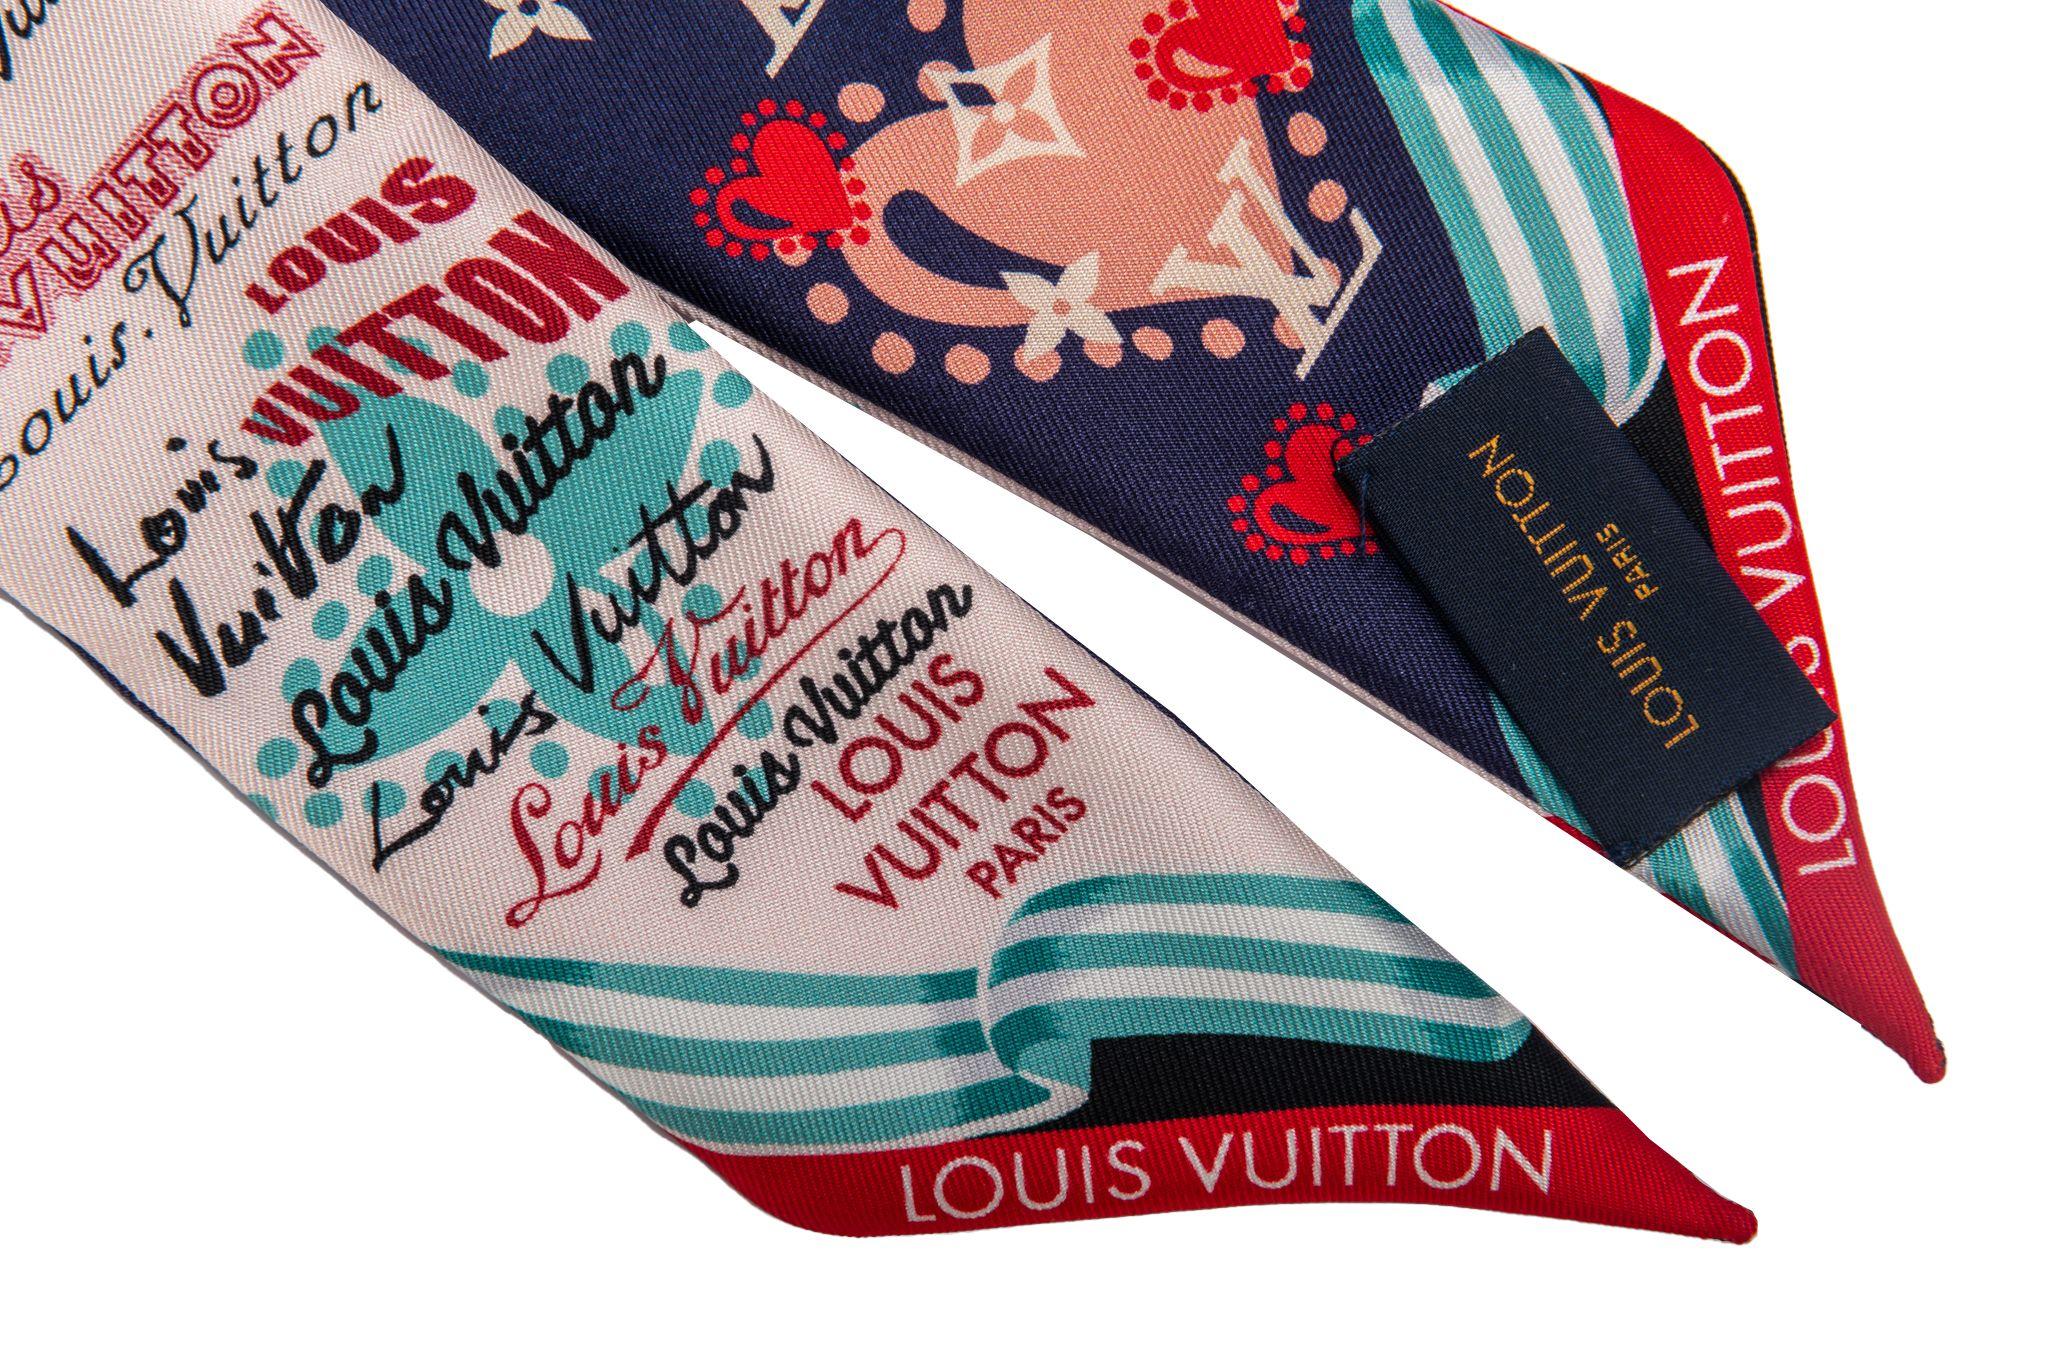 Louis Vuitton brand new in box blue and red hearts style design twilly. 100% silk.